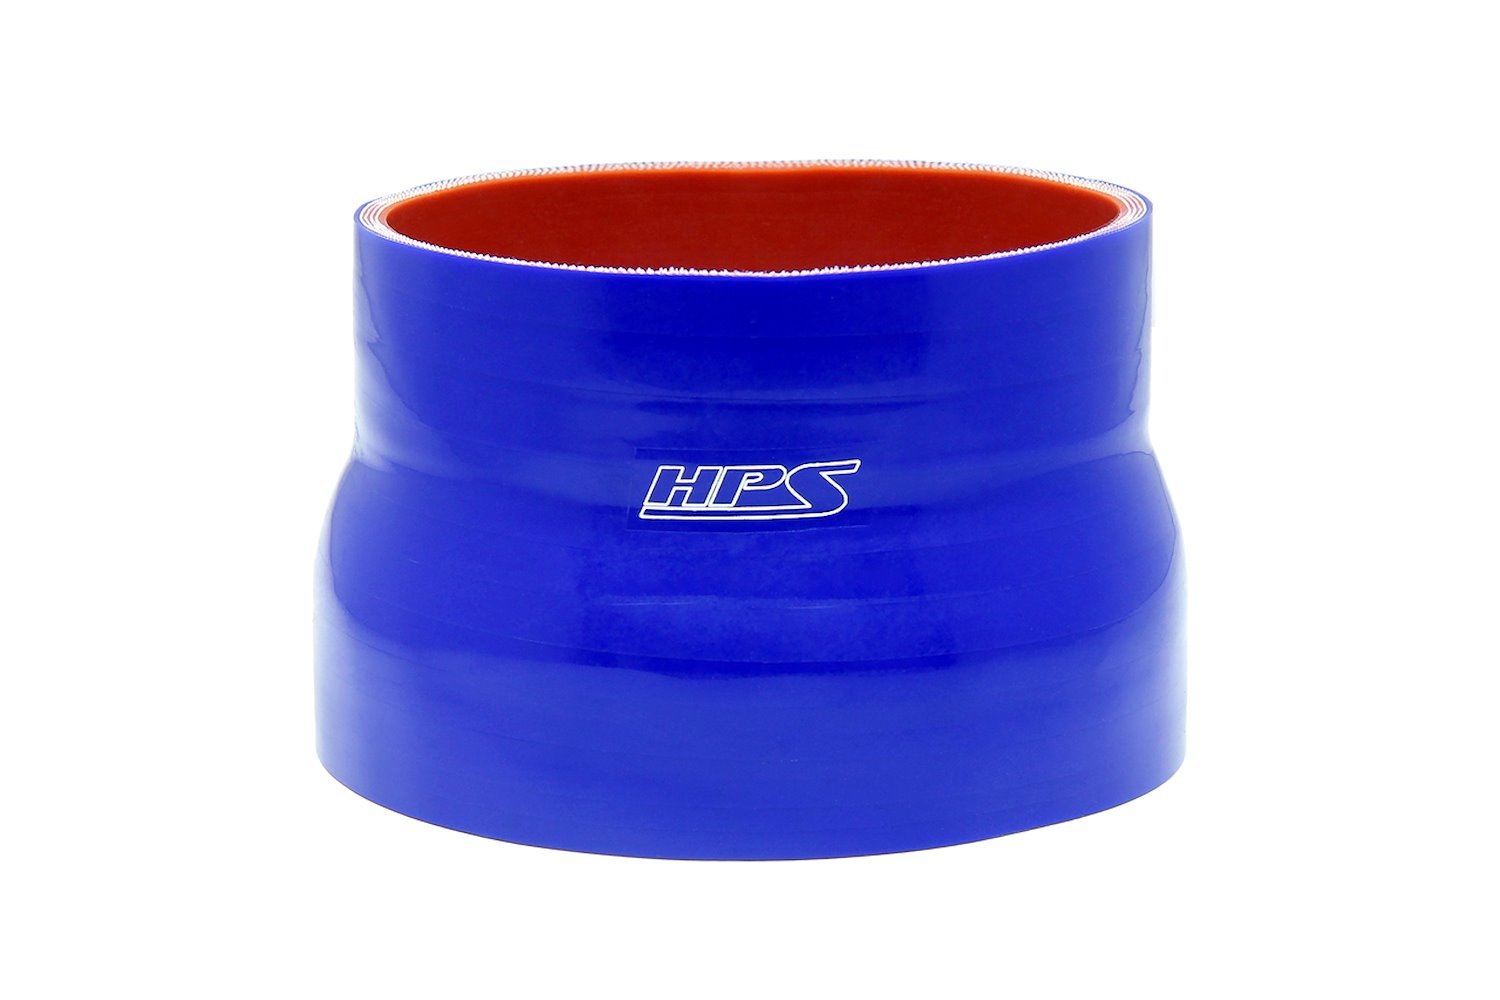 HTSR-400-600-L6-BLUE Silicone Reducer Hose, High-Temp 4-Ply Reinforced, 4 in. - 6 in. ID, 6 in. Long, Blue